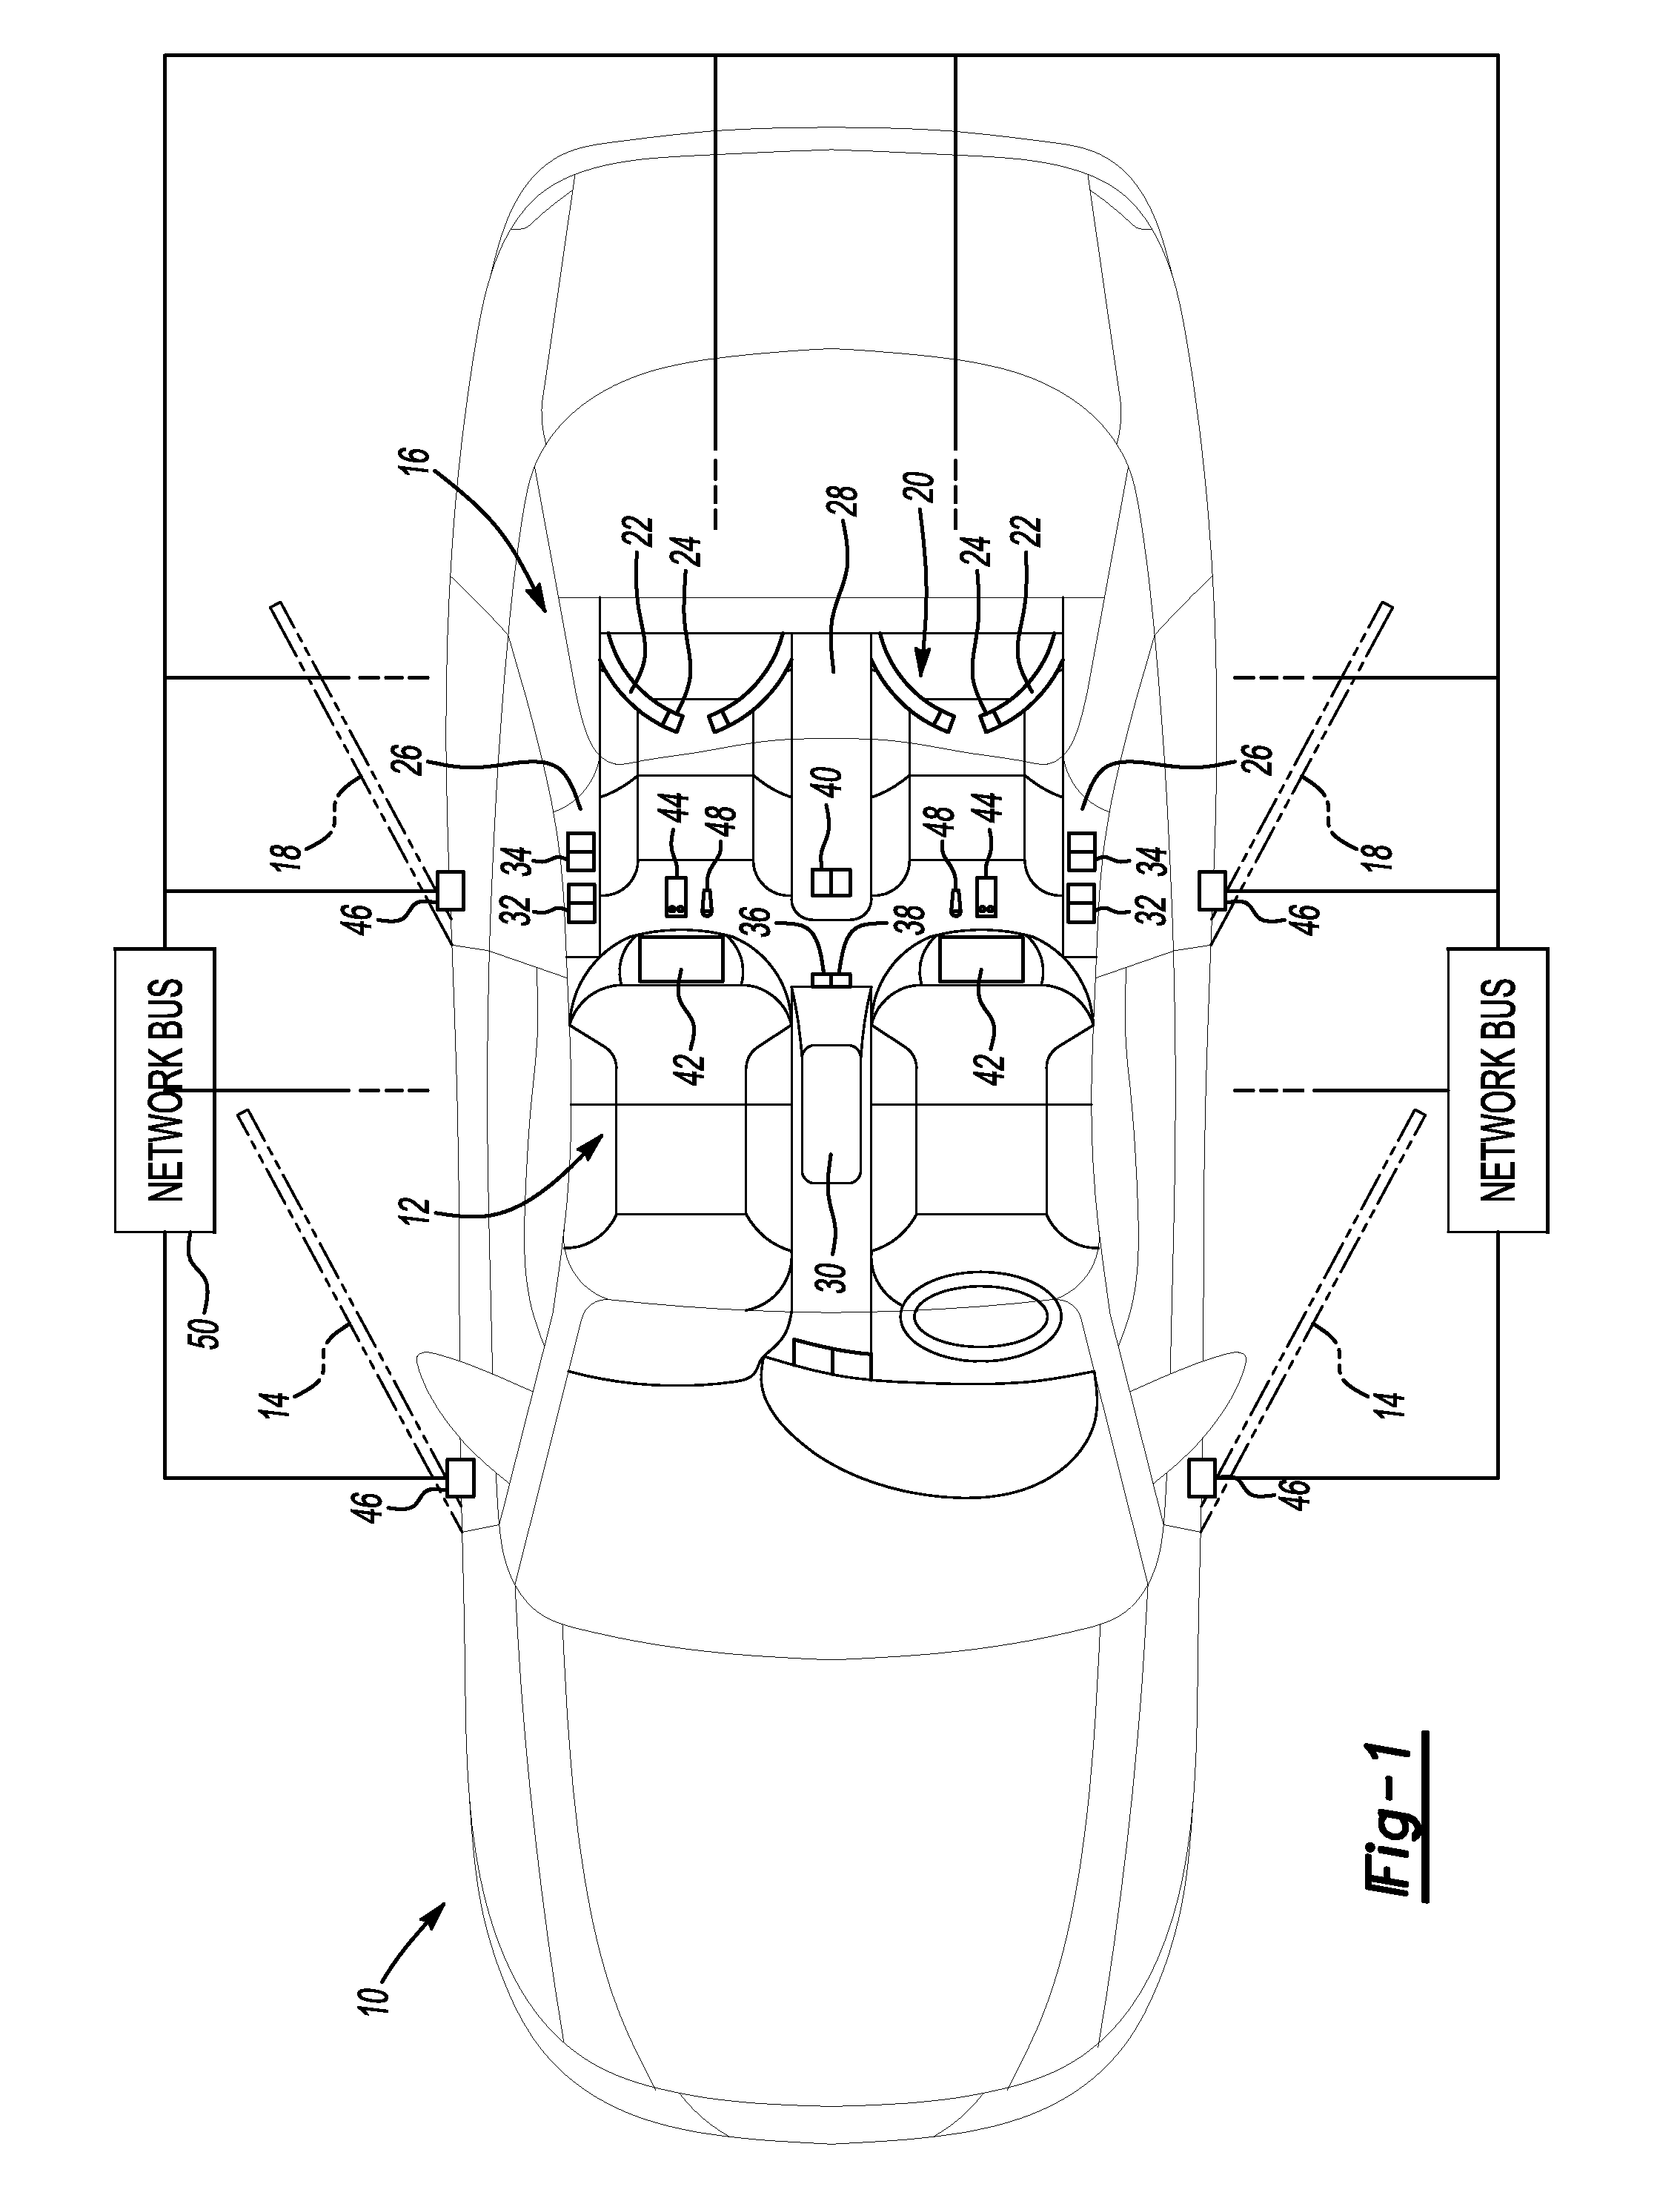 System and method of vehicle passenger detection for rear seating rows